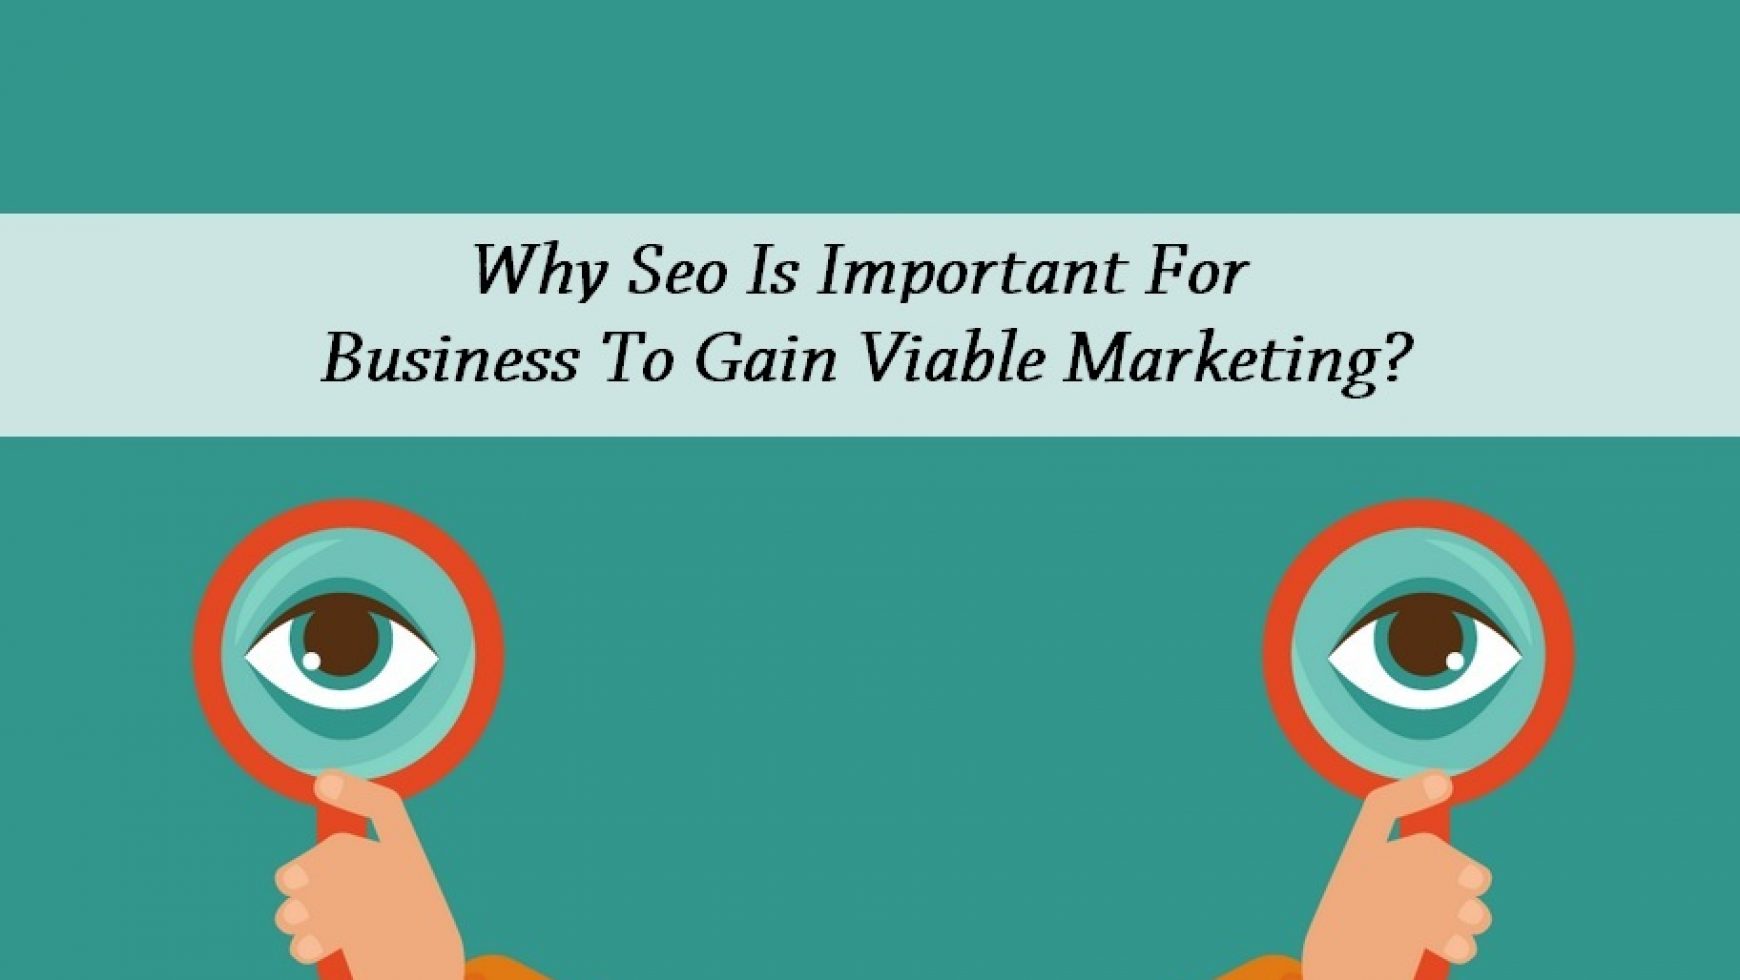 Why Seo Is Important For Business To Gain Viable Marketing?